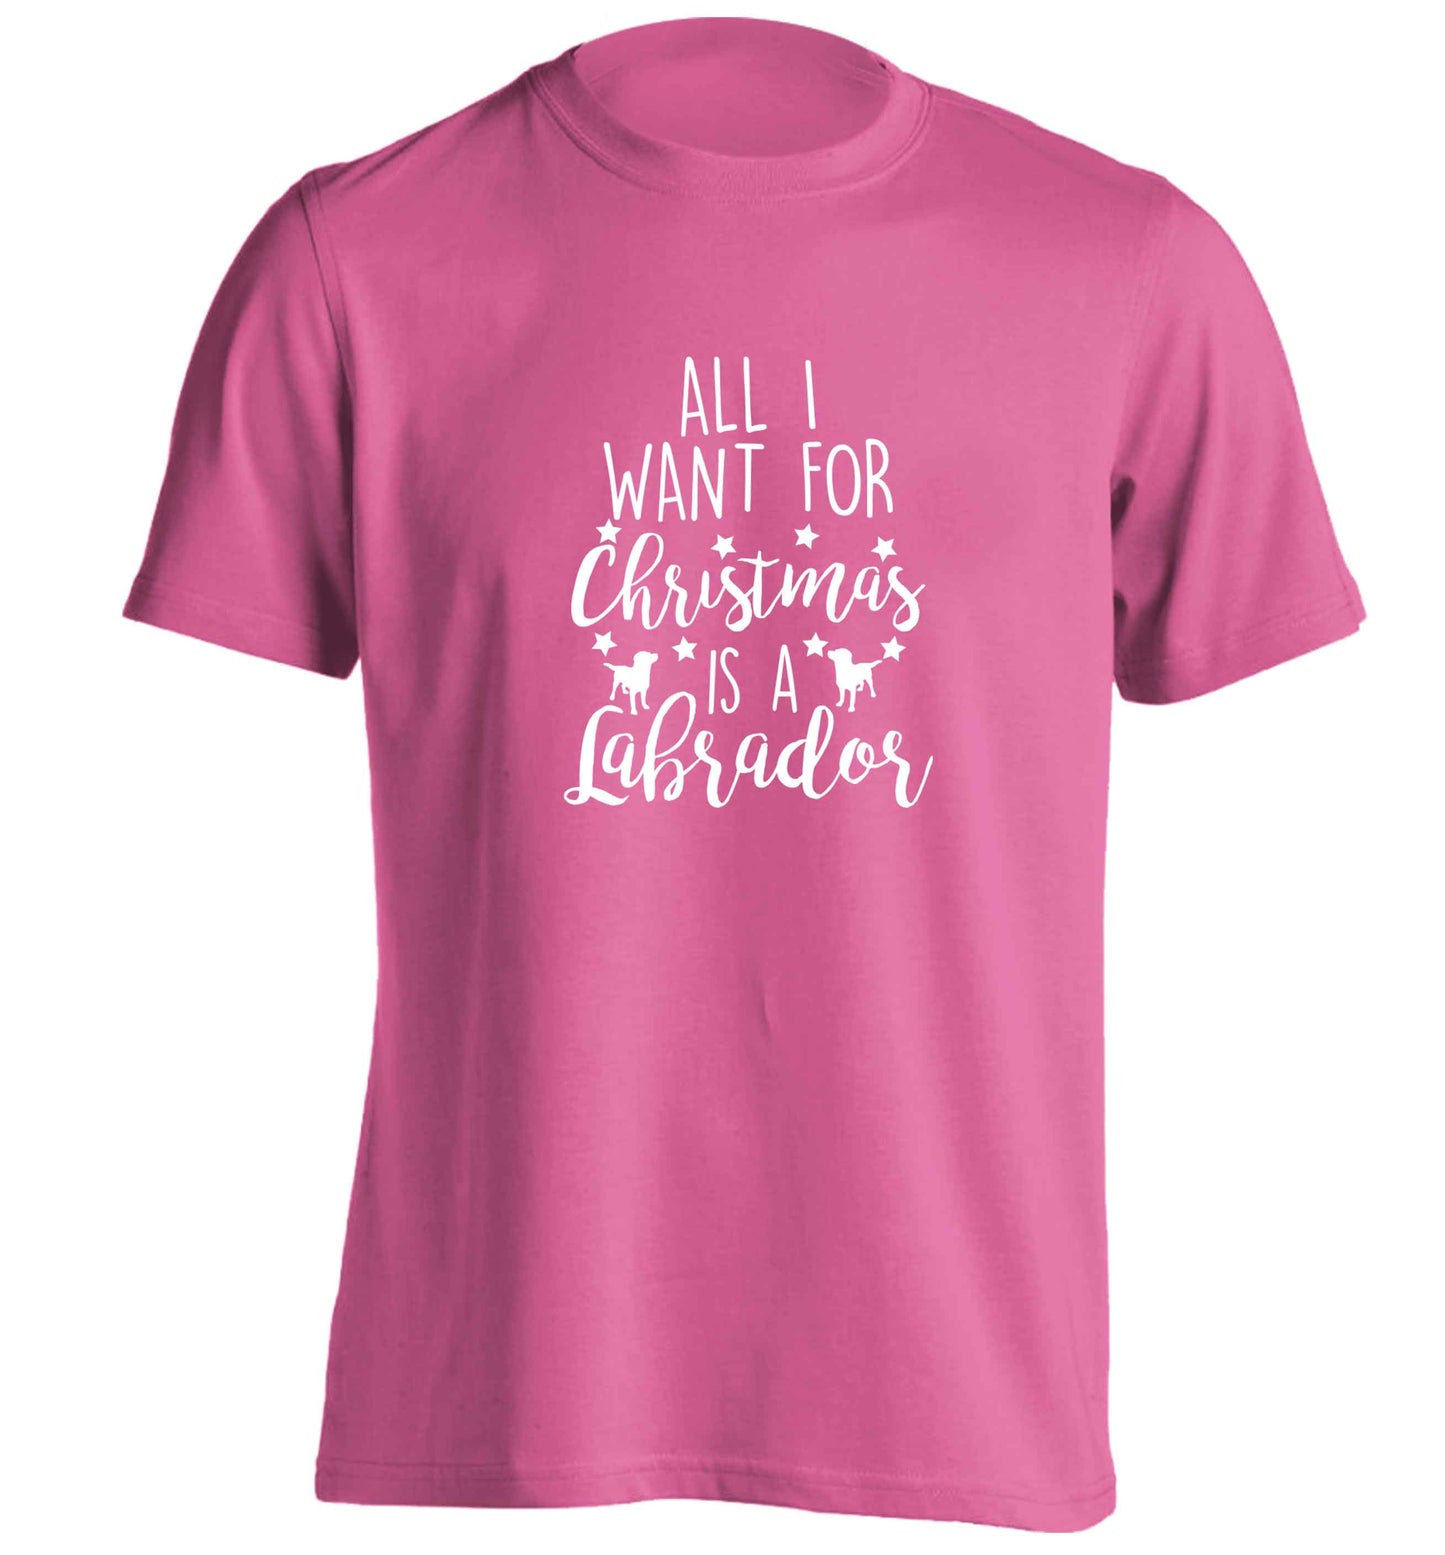 All I want for Christmas is a labrador adults unisex pink Tshirt 2XL